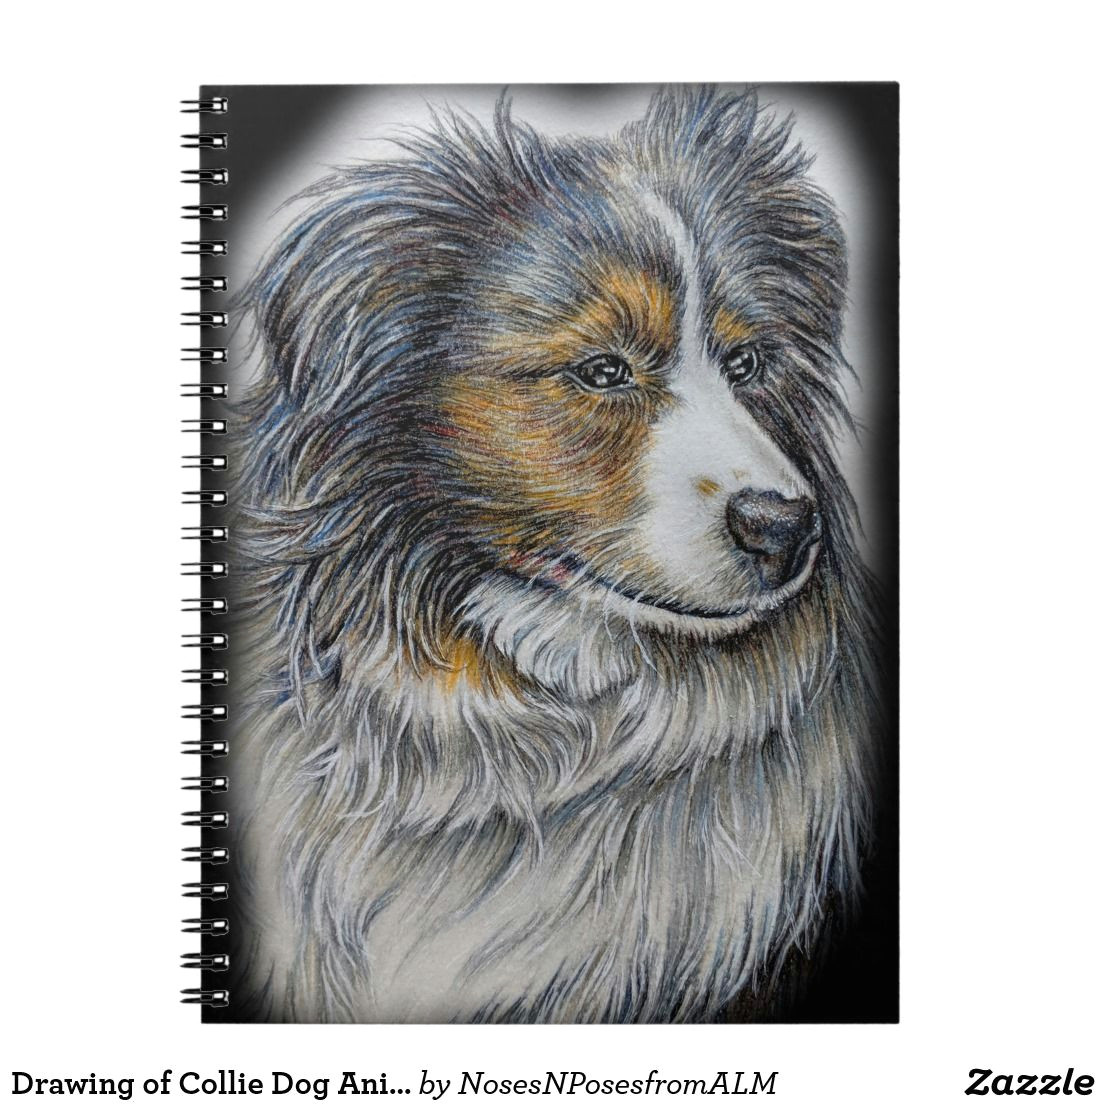 Drawing Of A Collie Dog Drawing Of Collie Dog Animal Art Notebook Collie Dog